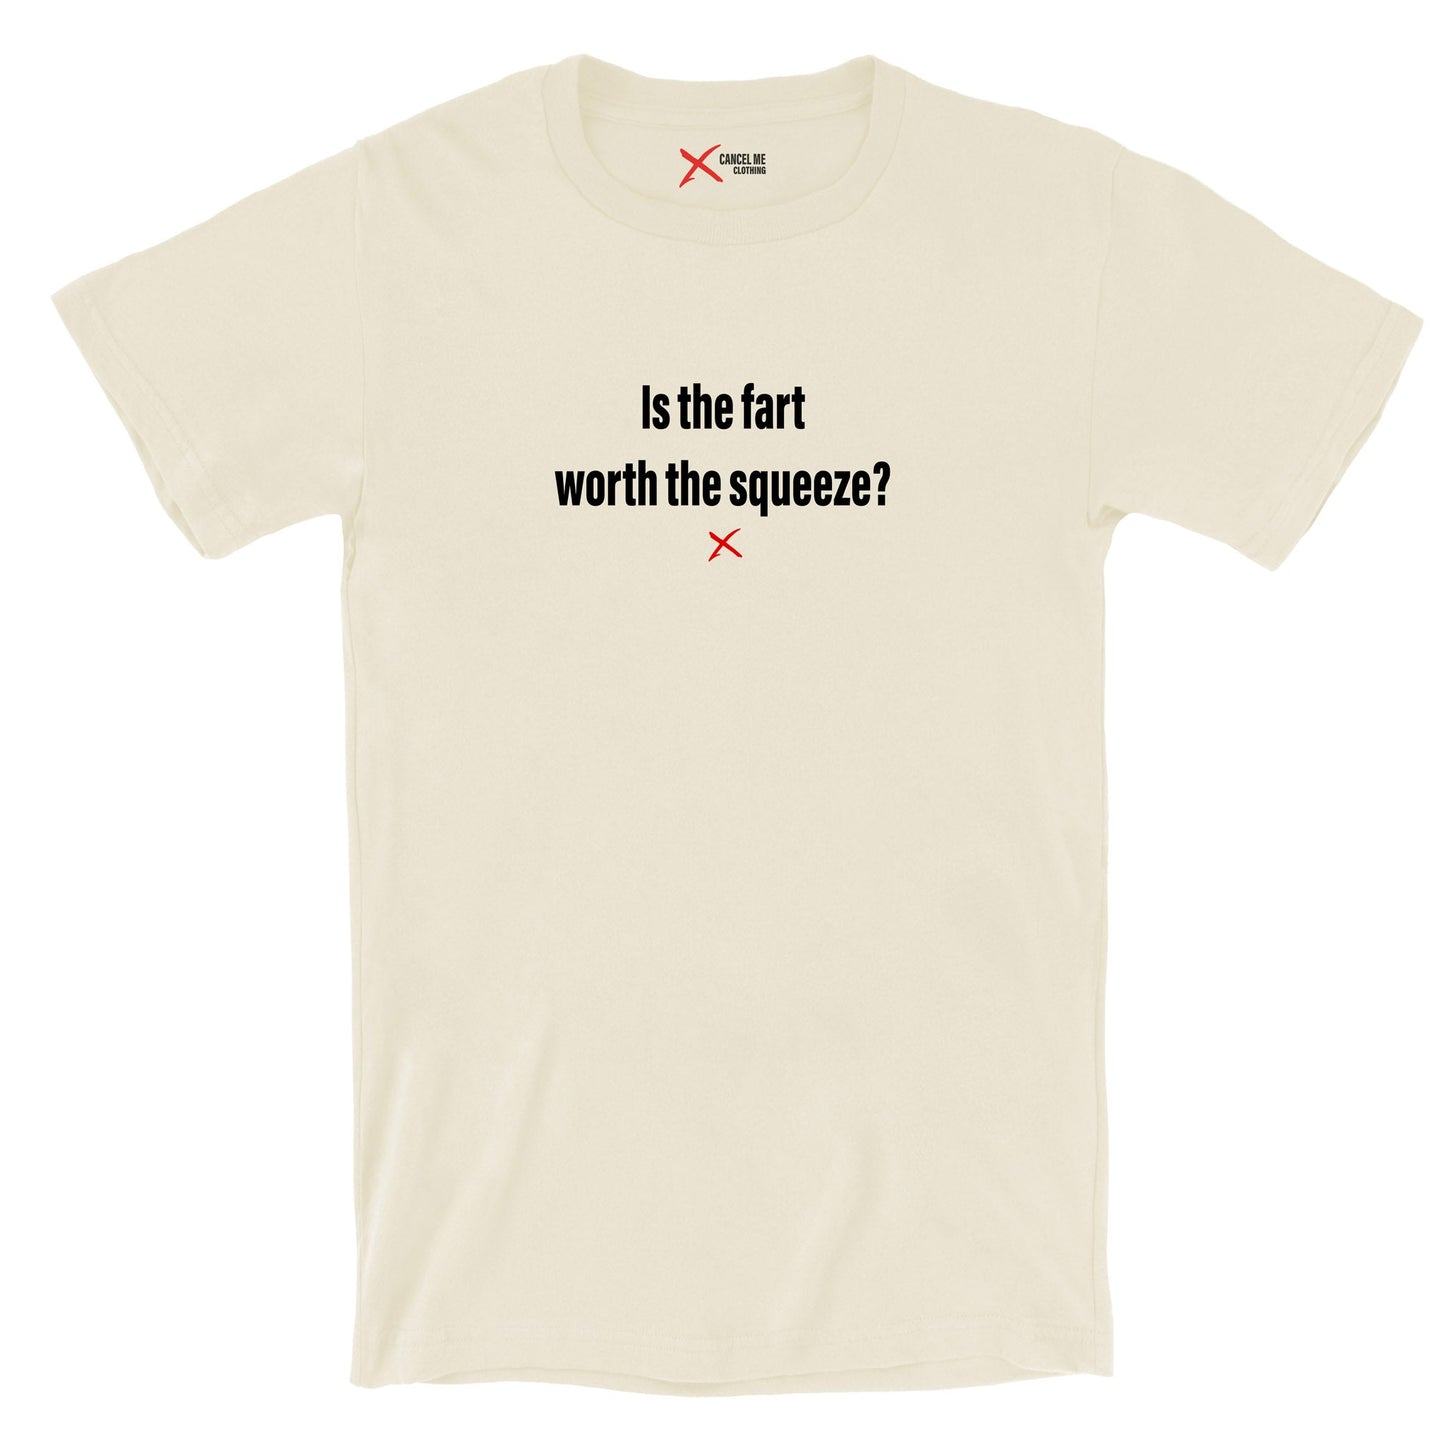 Is the fart worth the squeeze? - Shirt